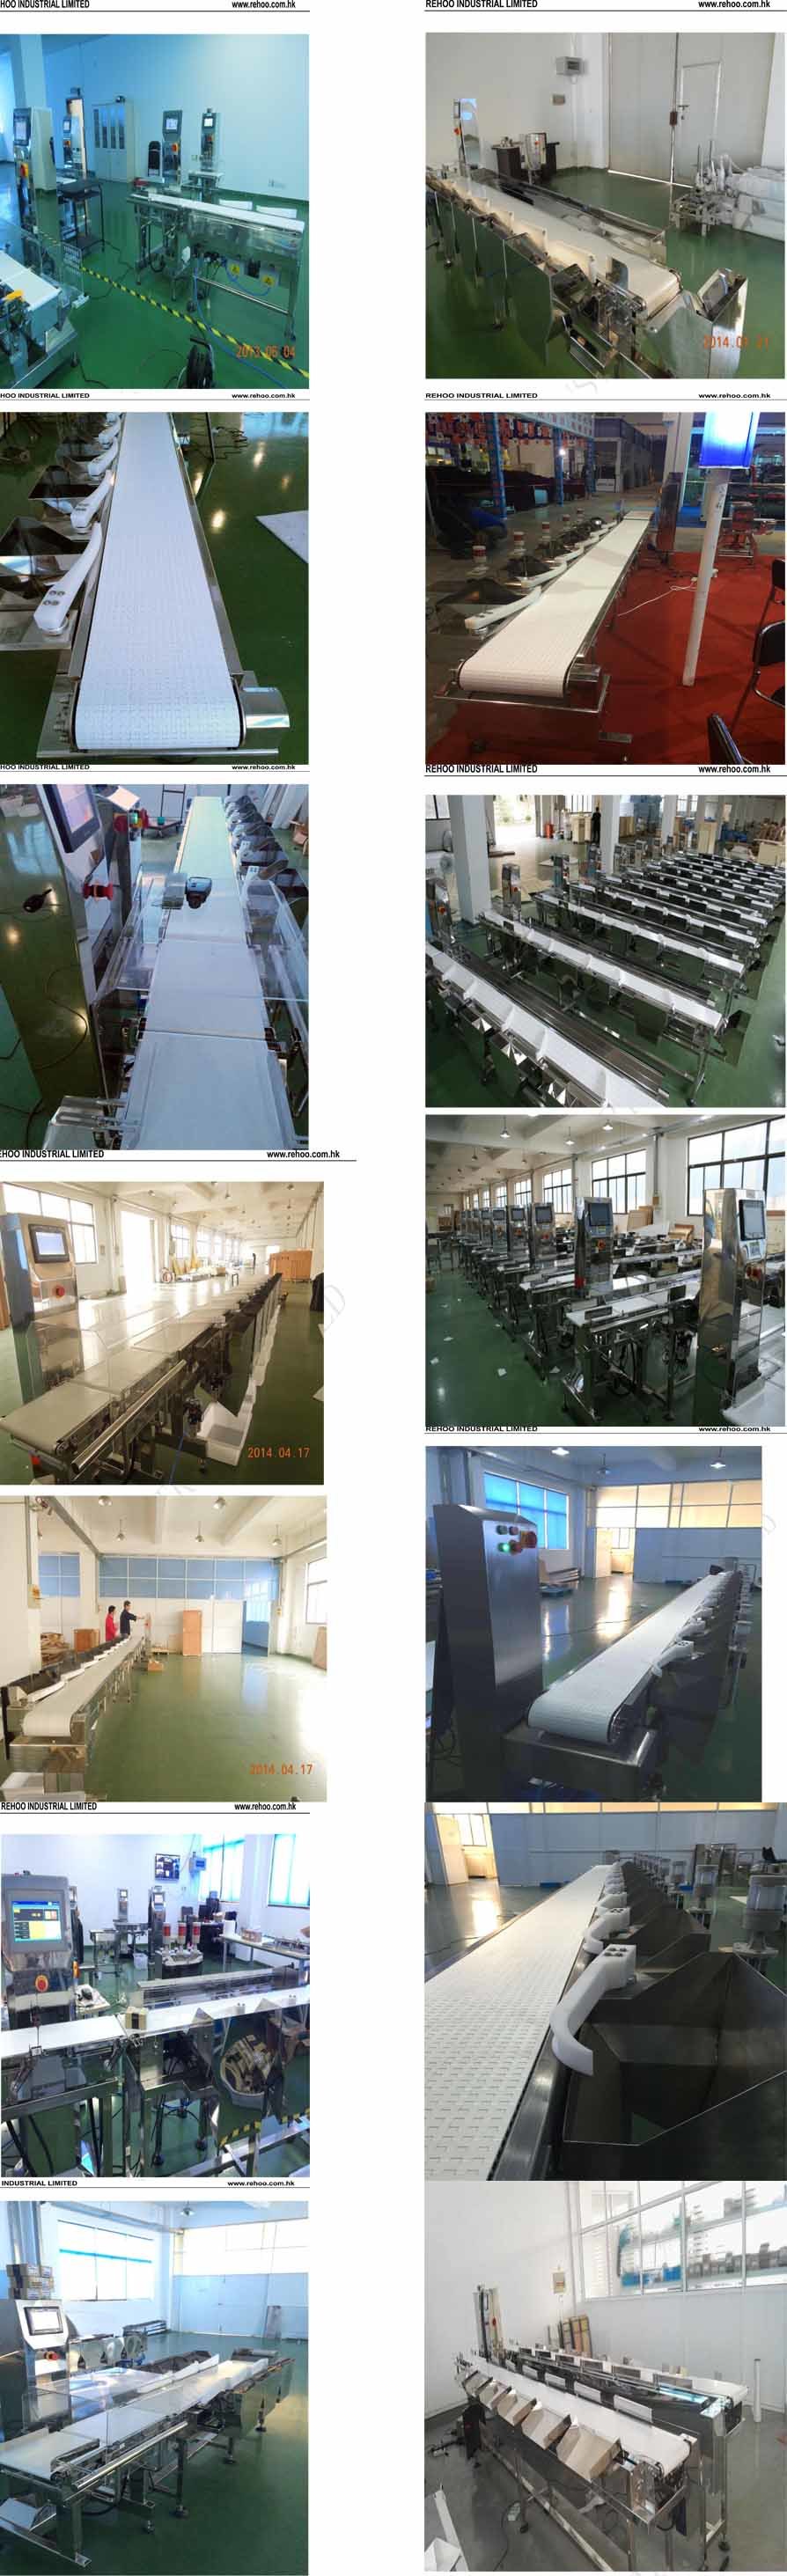 Weight Grading System/Sorting Machine for Weight/Grading System for Weight/Weiging and Sorting Machine/Online Sorting Machine for Weight